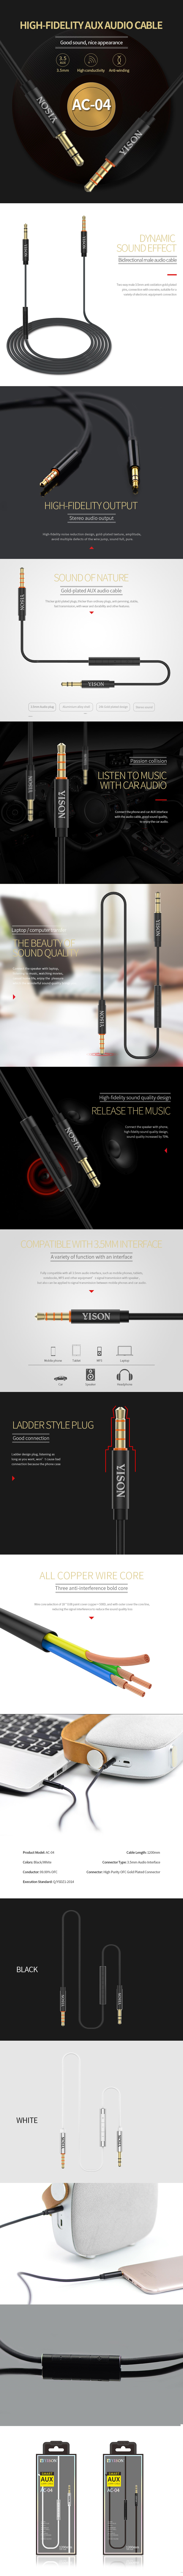 YISON AC-04 2018 New Products High Grade Audio Cable Handsfree Audio Video Cable Free Samples Aux Cable For Headphone Iphone